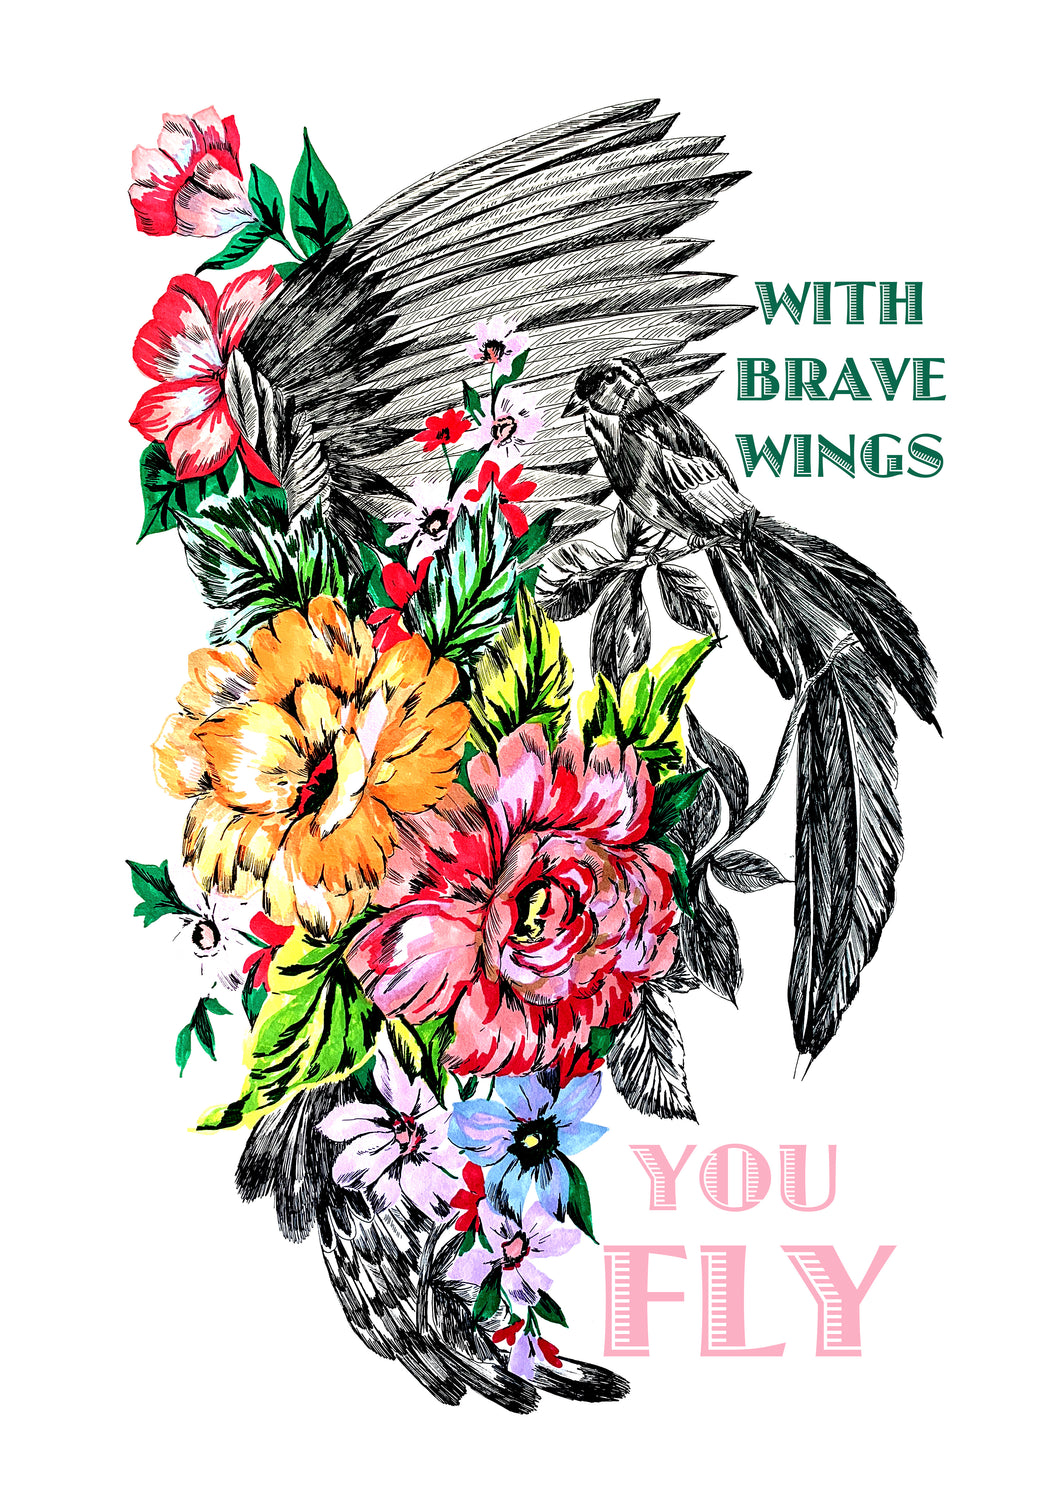 With Brave Wings You Fly Giclée Print